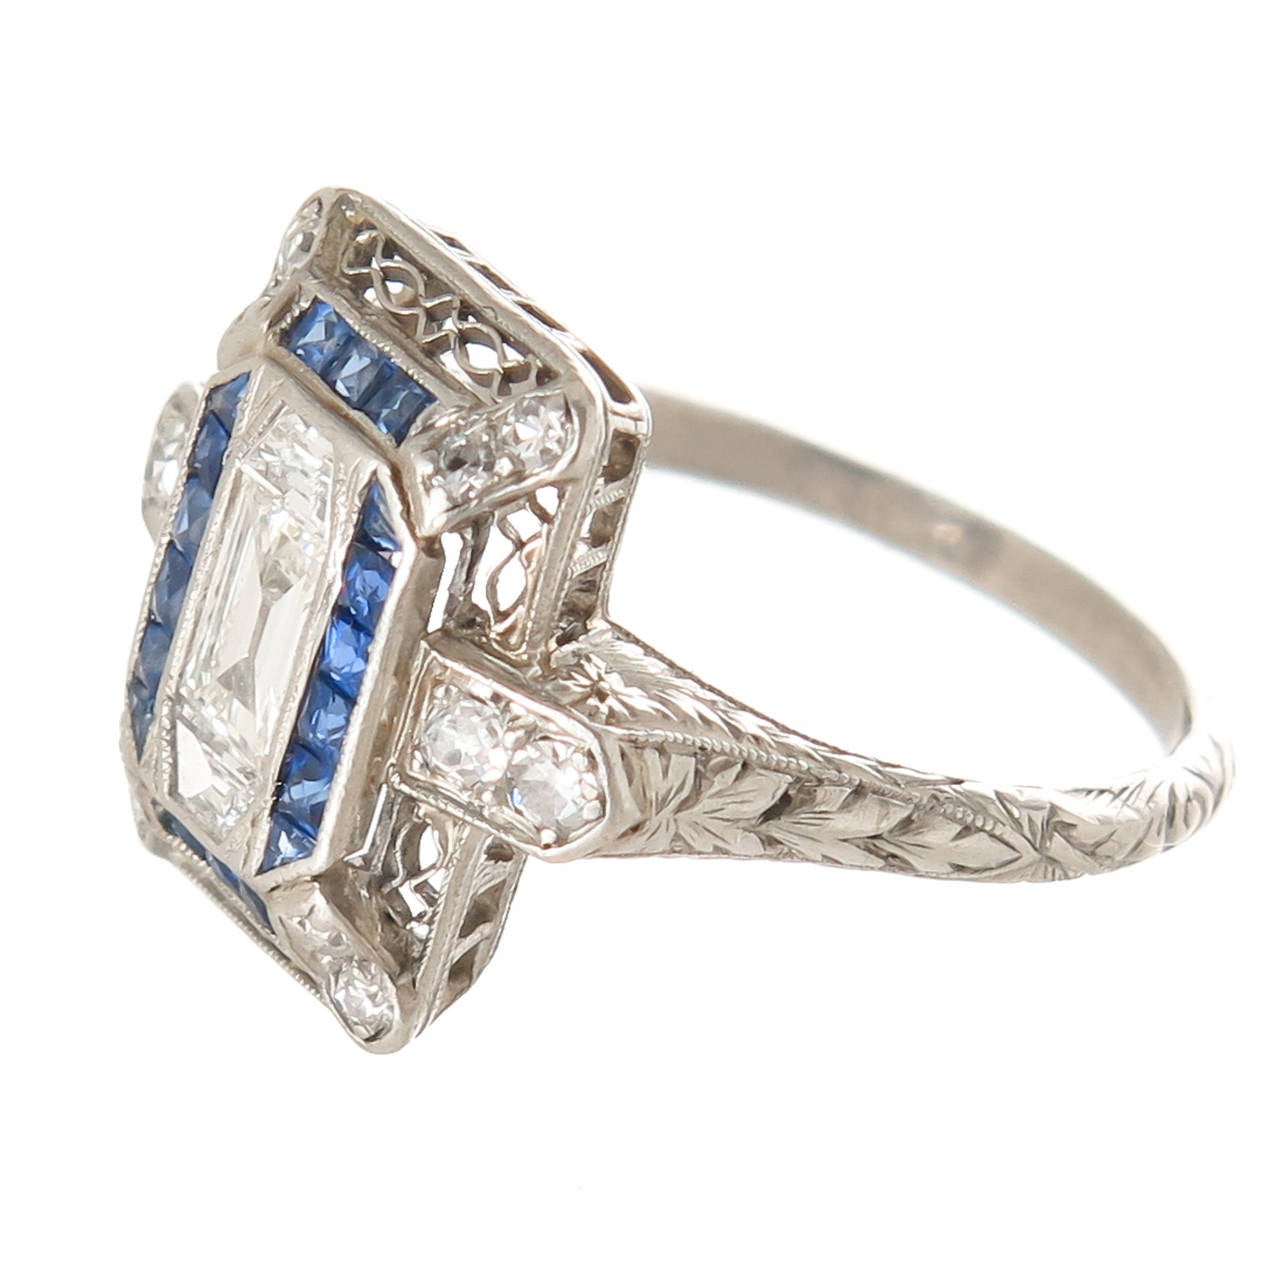 Circa 1930s Platinum, Diamond and Sapphire Ring, centrally set with a step cut diamond approximately 1/4 carat and flanked on either side by a step cut Trapezoid Diamond, further set with round diamonds and Swiss cut Sapphires. The Gallery and shank